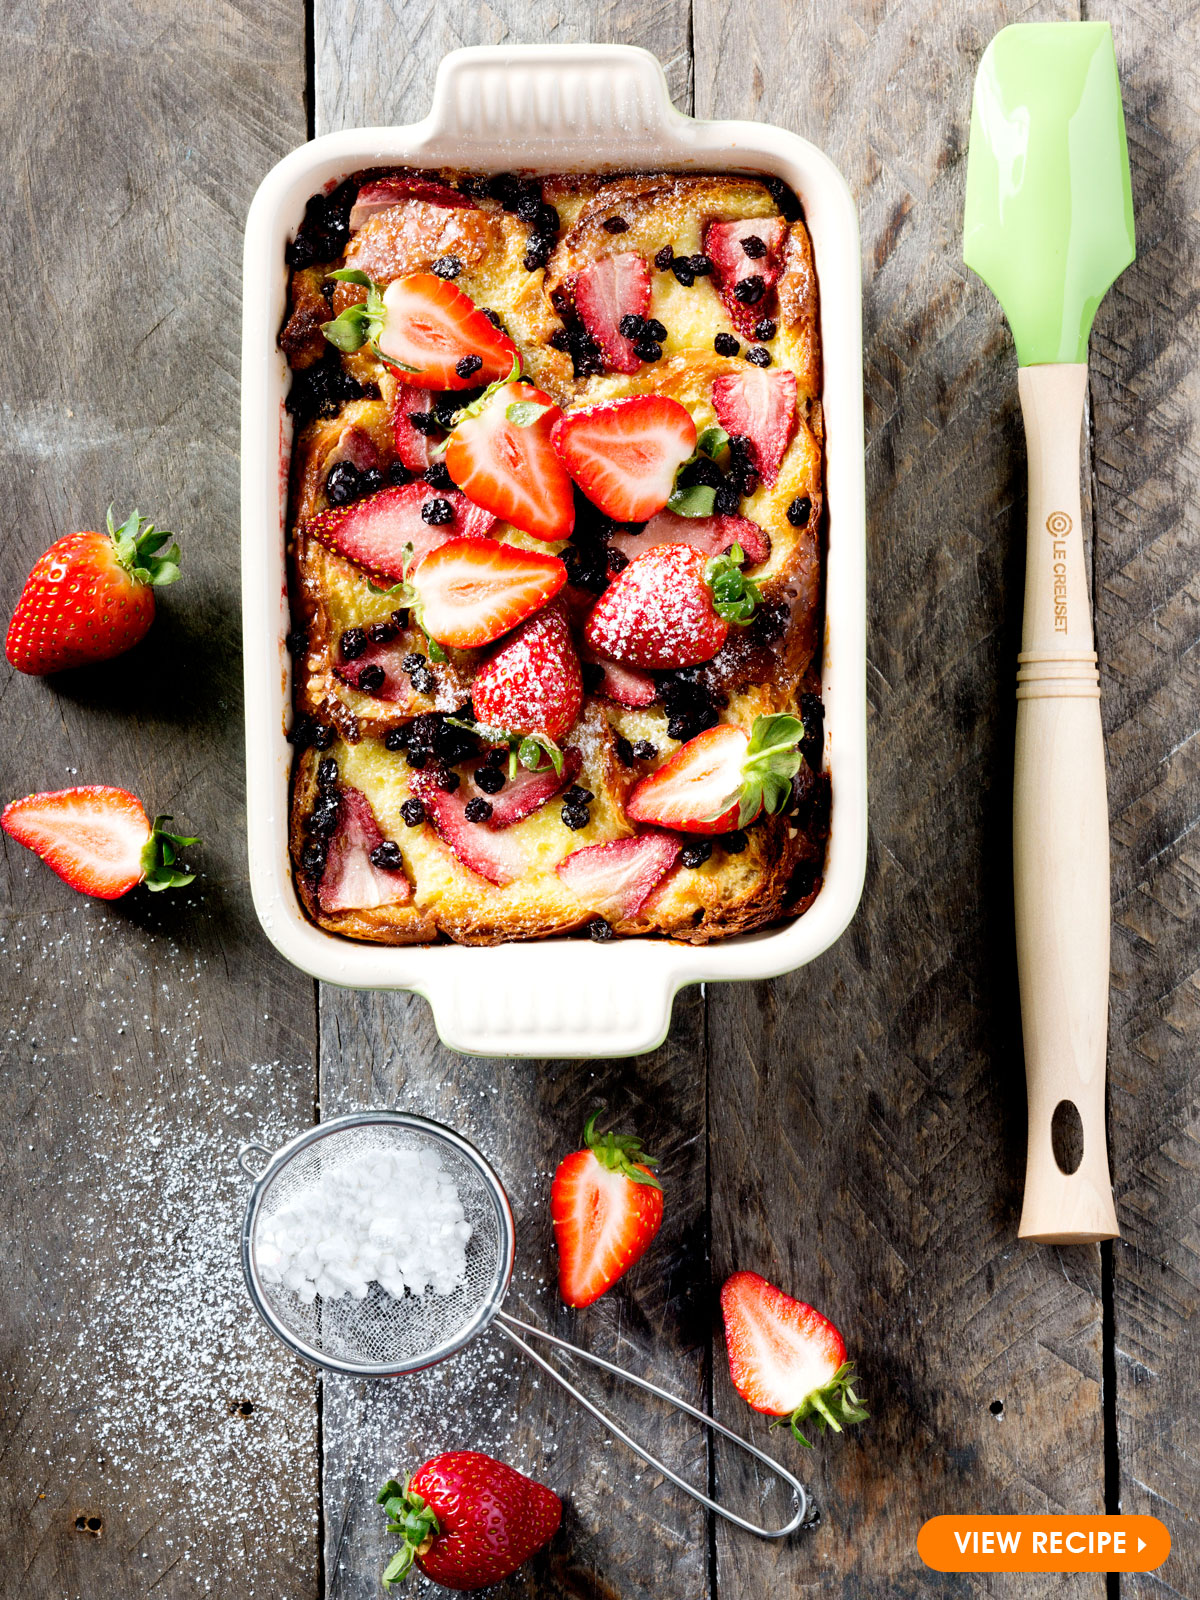 Strawberry Bread and Butter Pudding: 